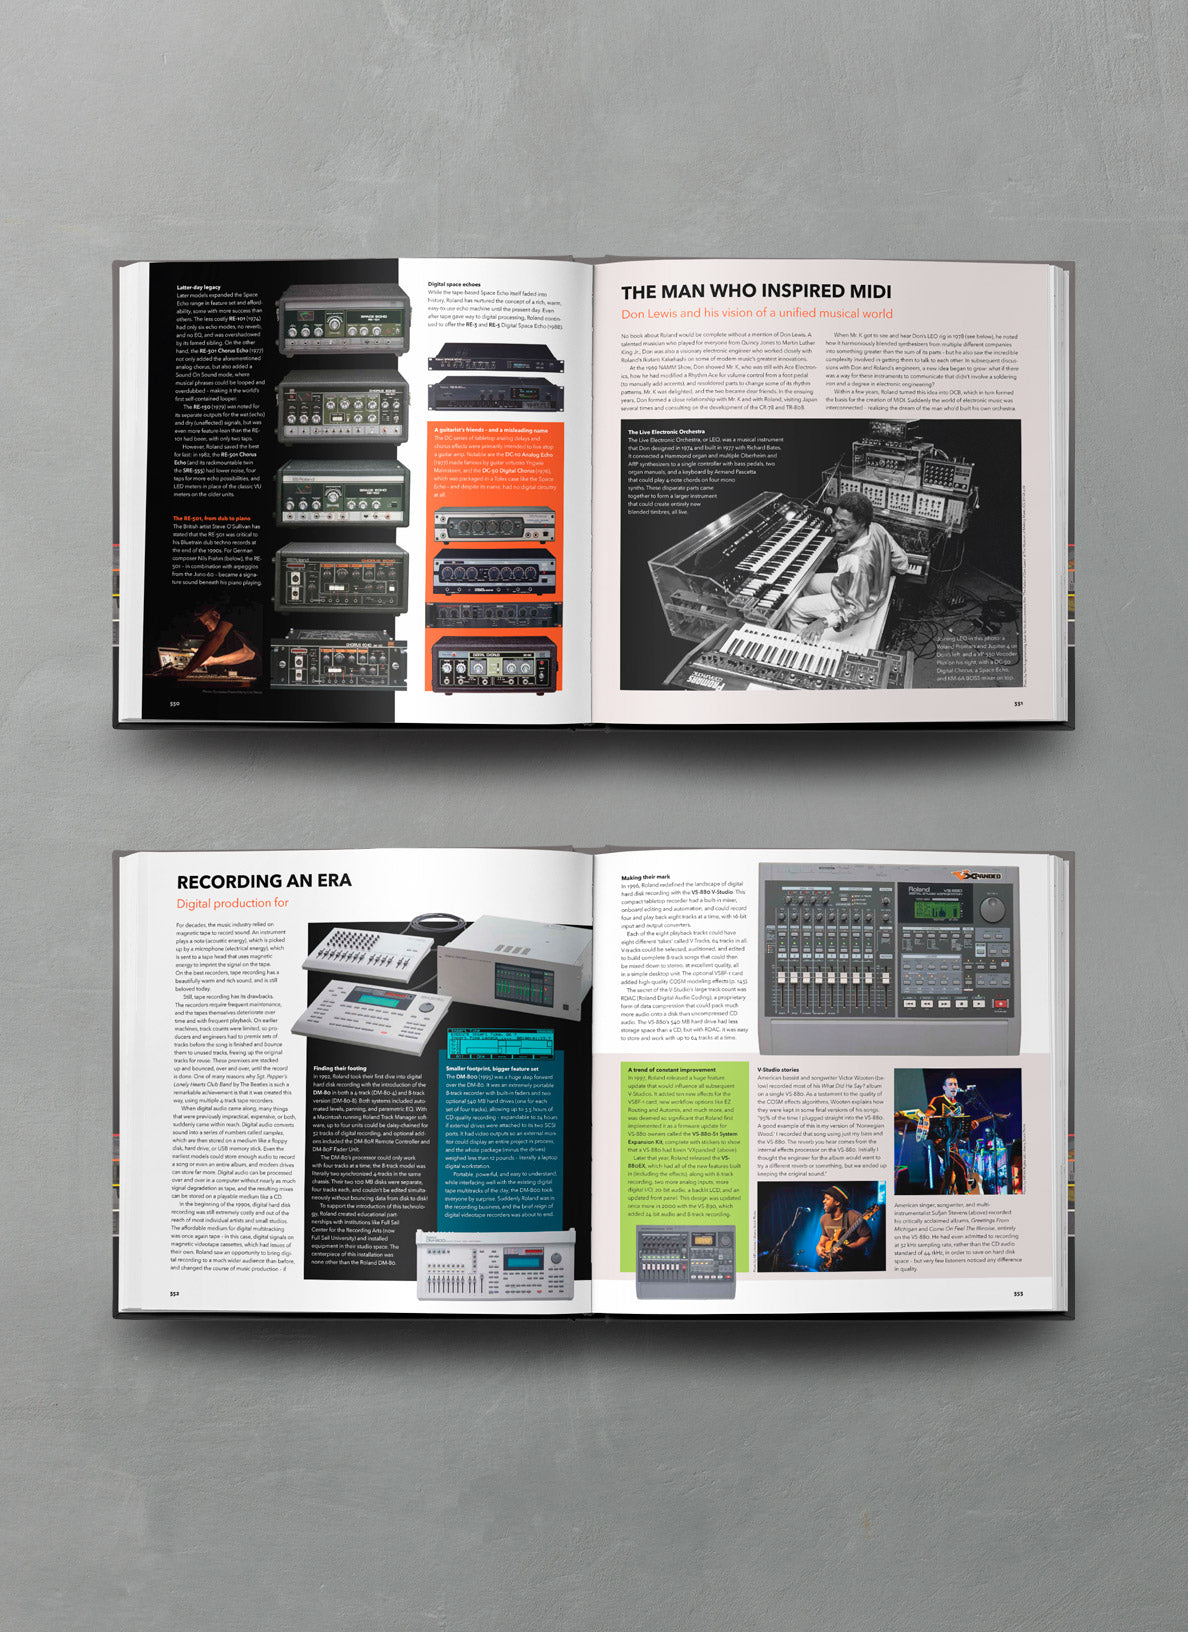 INSPIRE THE MUSIC - 50 YEARS OF ROLAND HISTORY